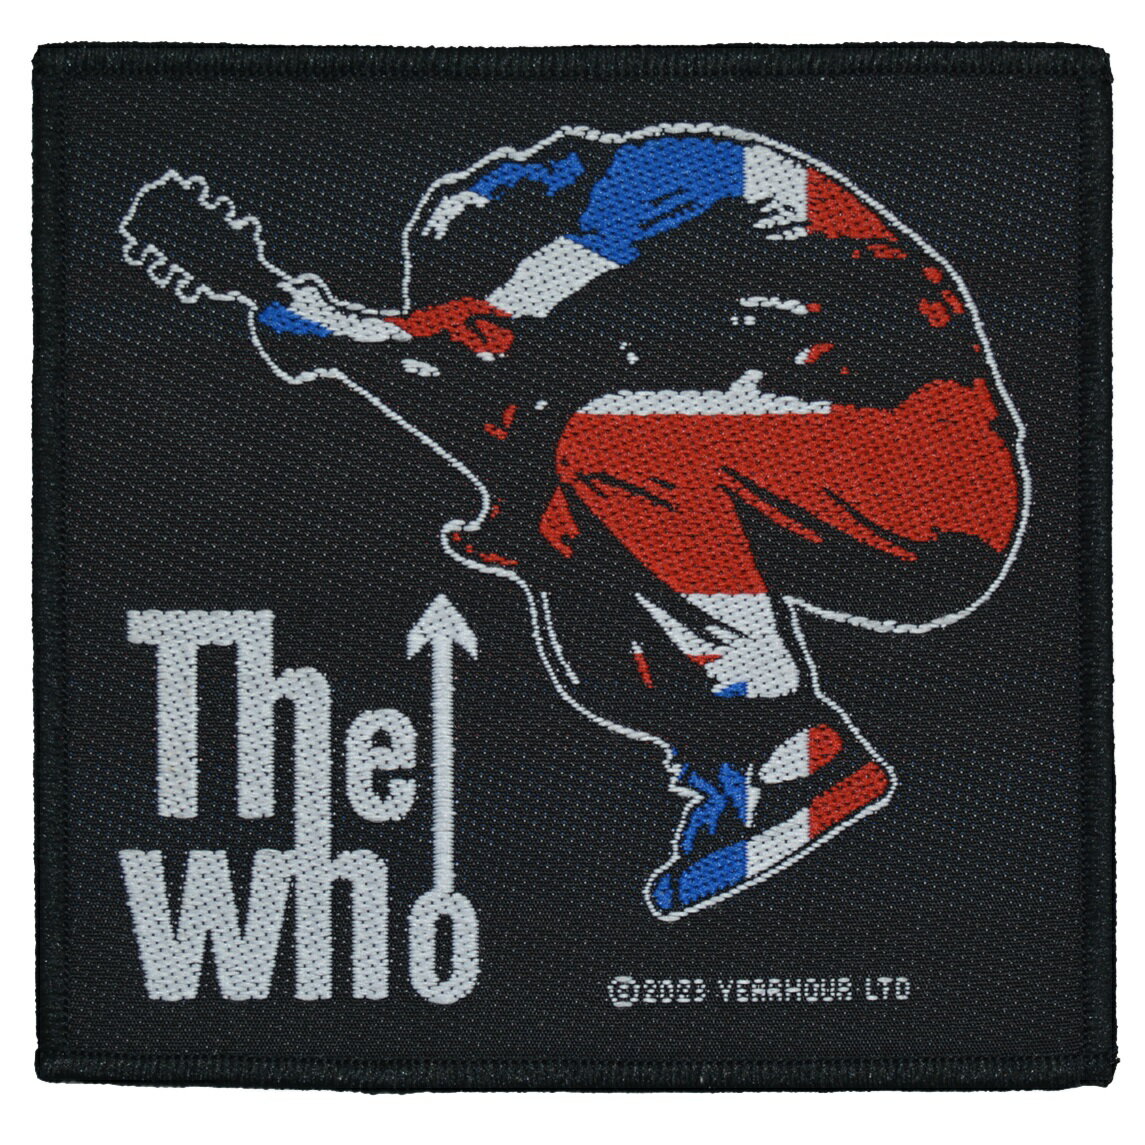 THE WHO t[ Pete Jump Patch by